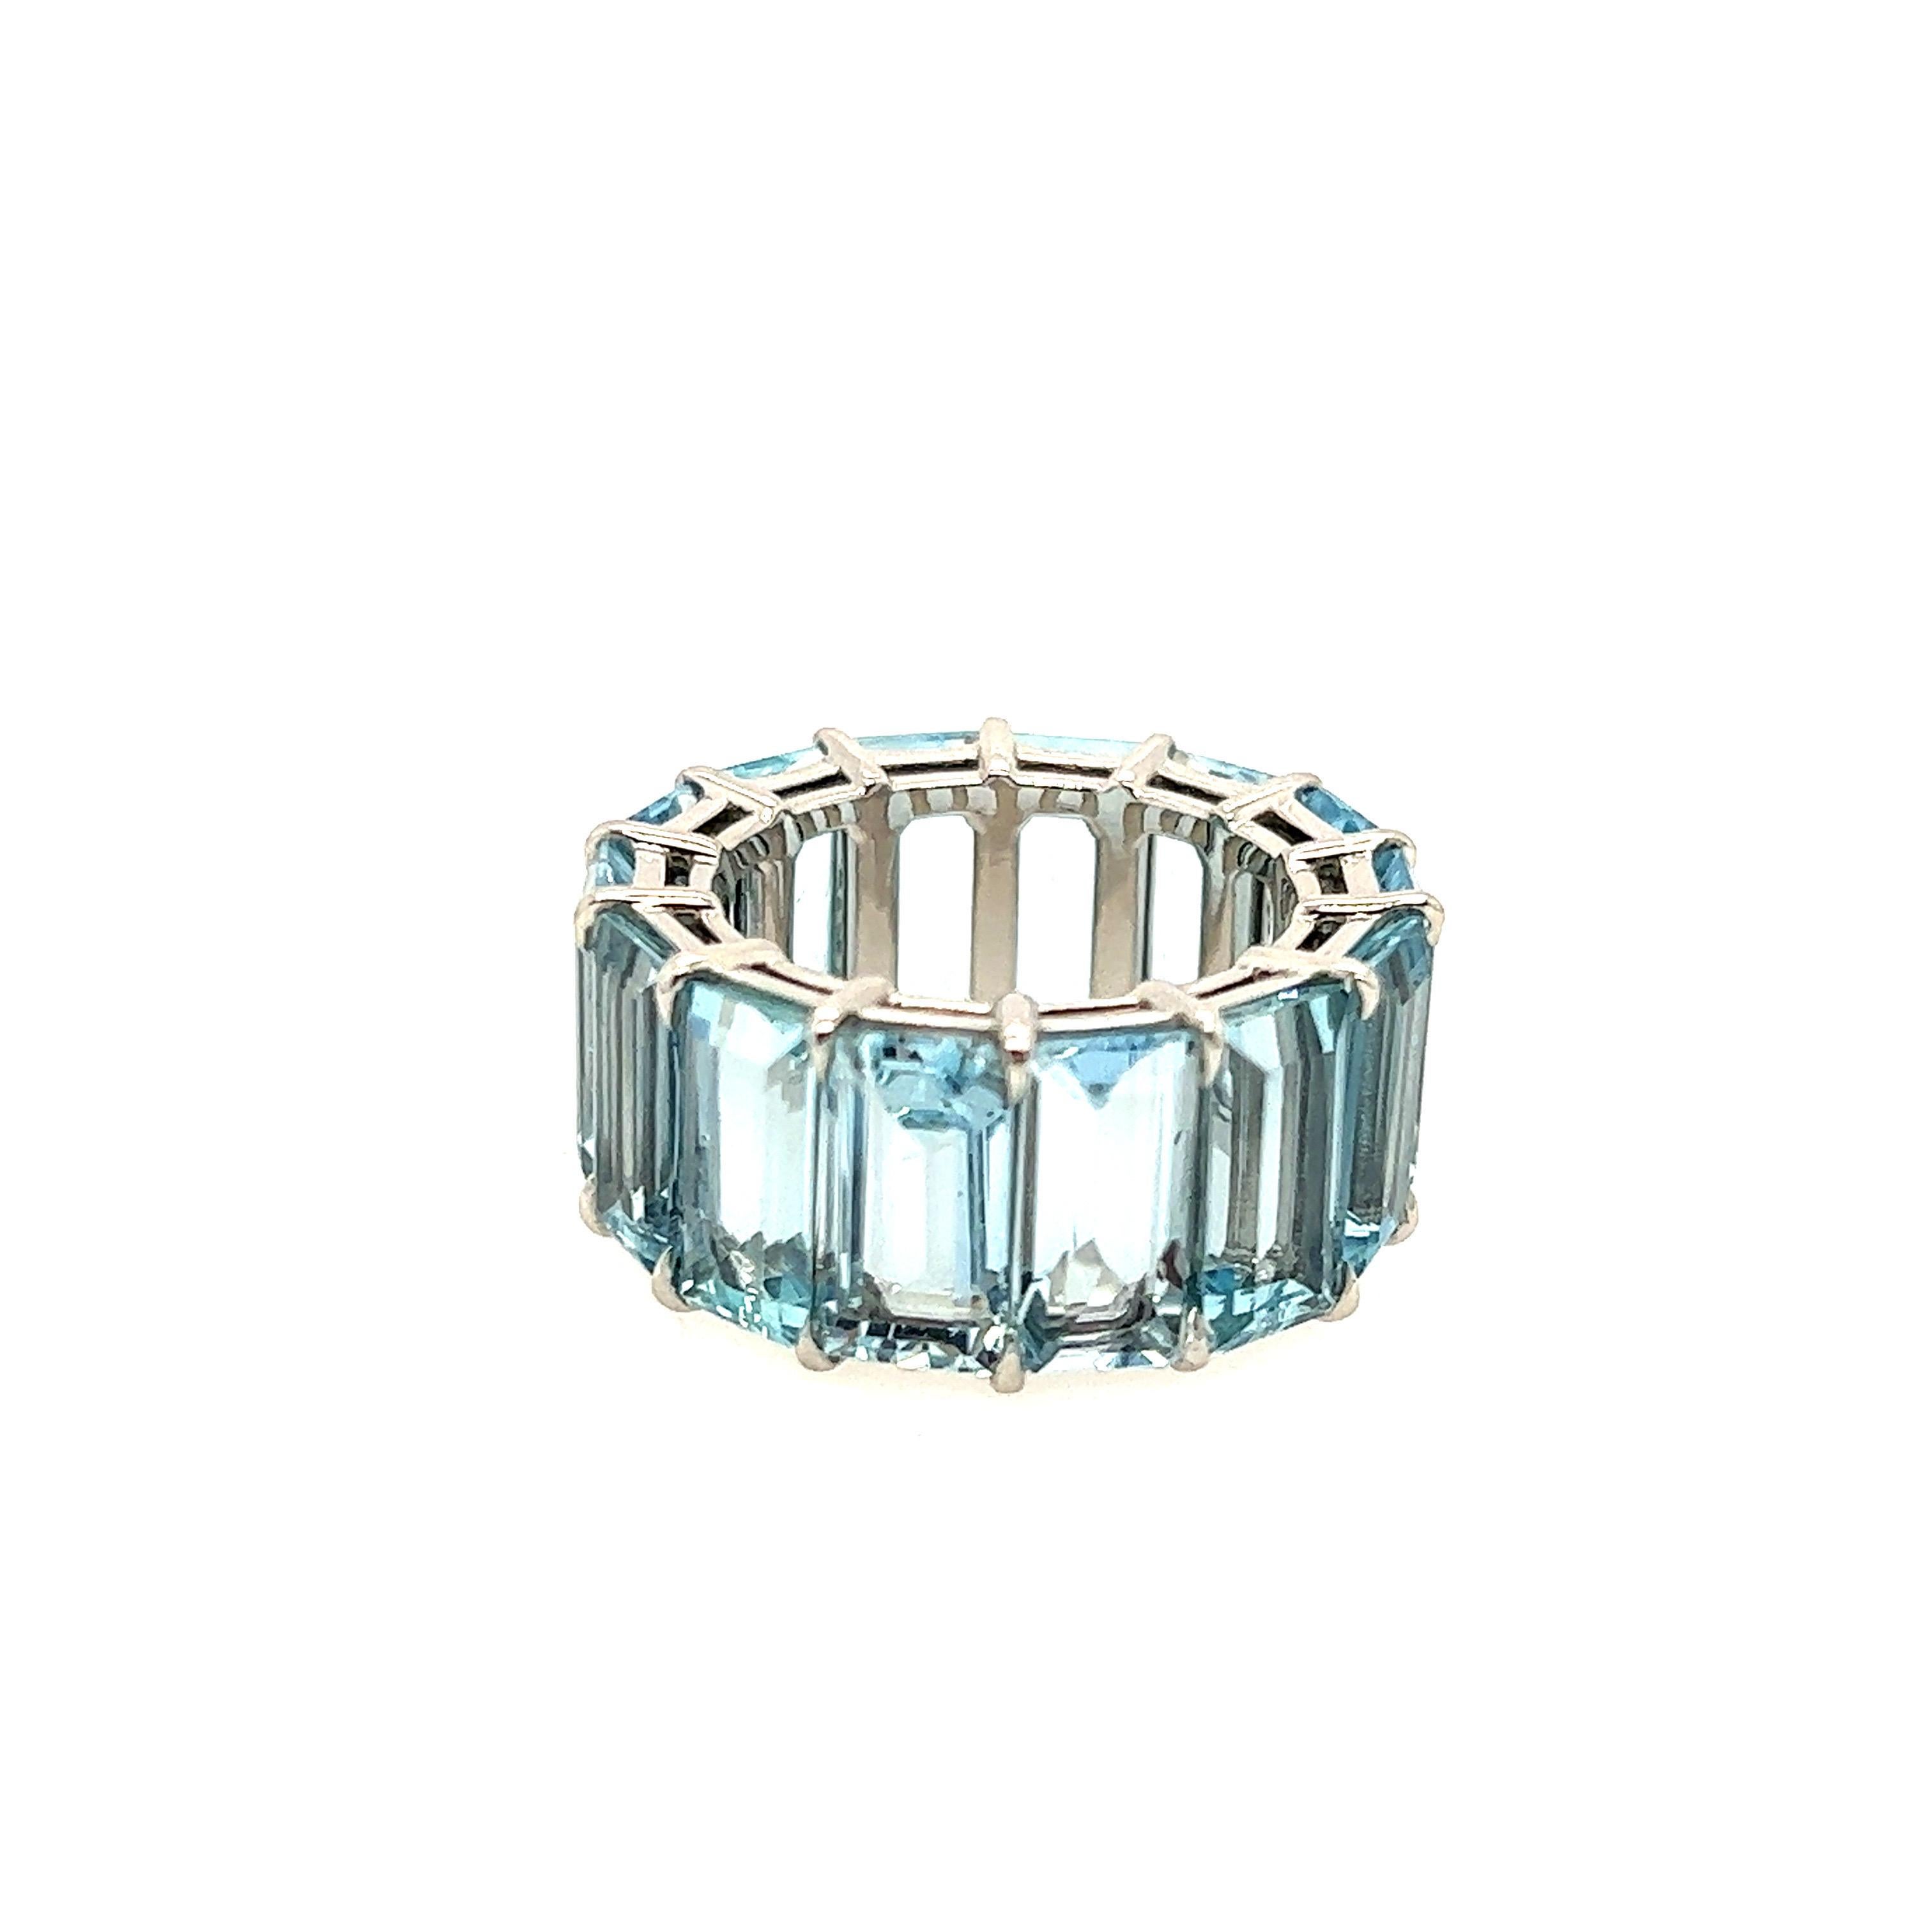 Bespoke Aquamarine platinum eternity band featuring 17cts of perfectly colored aquas. This band is very unique because the stones are extremely long and striking which only enhances the beautiful blue color. The platinum setting is so beautifully